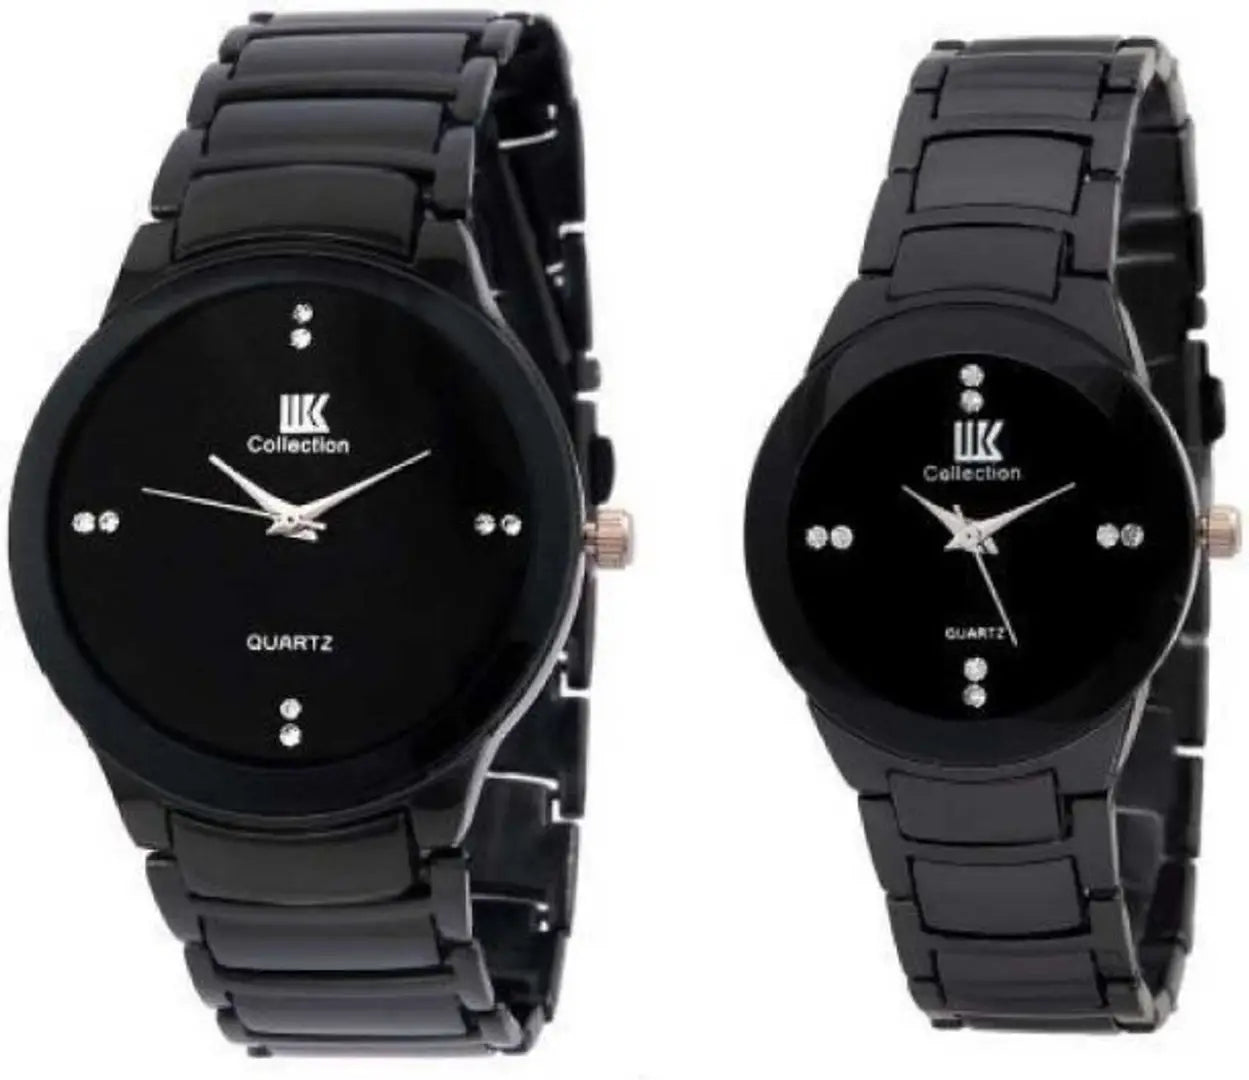 Couple Watches - Stylish Couple Watches Branded With Free Gift Box - Buy 1  Get 1 free Watches - Leather Strap Square Dial Watches For Men and Women -  Imported Men And Women Watch Pair - Unisex Accessories